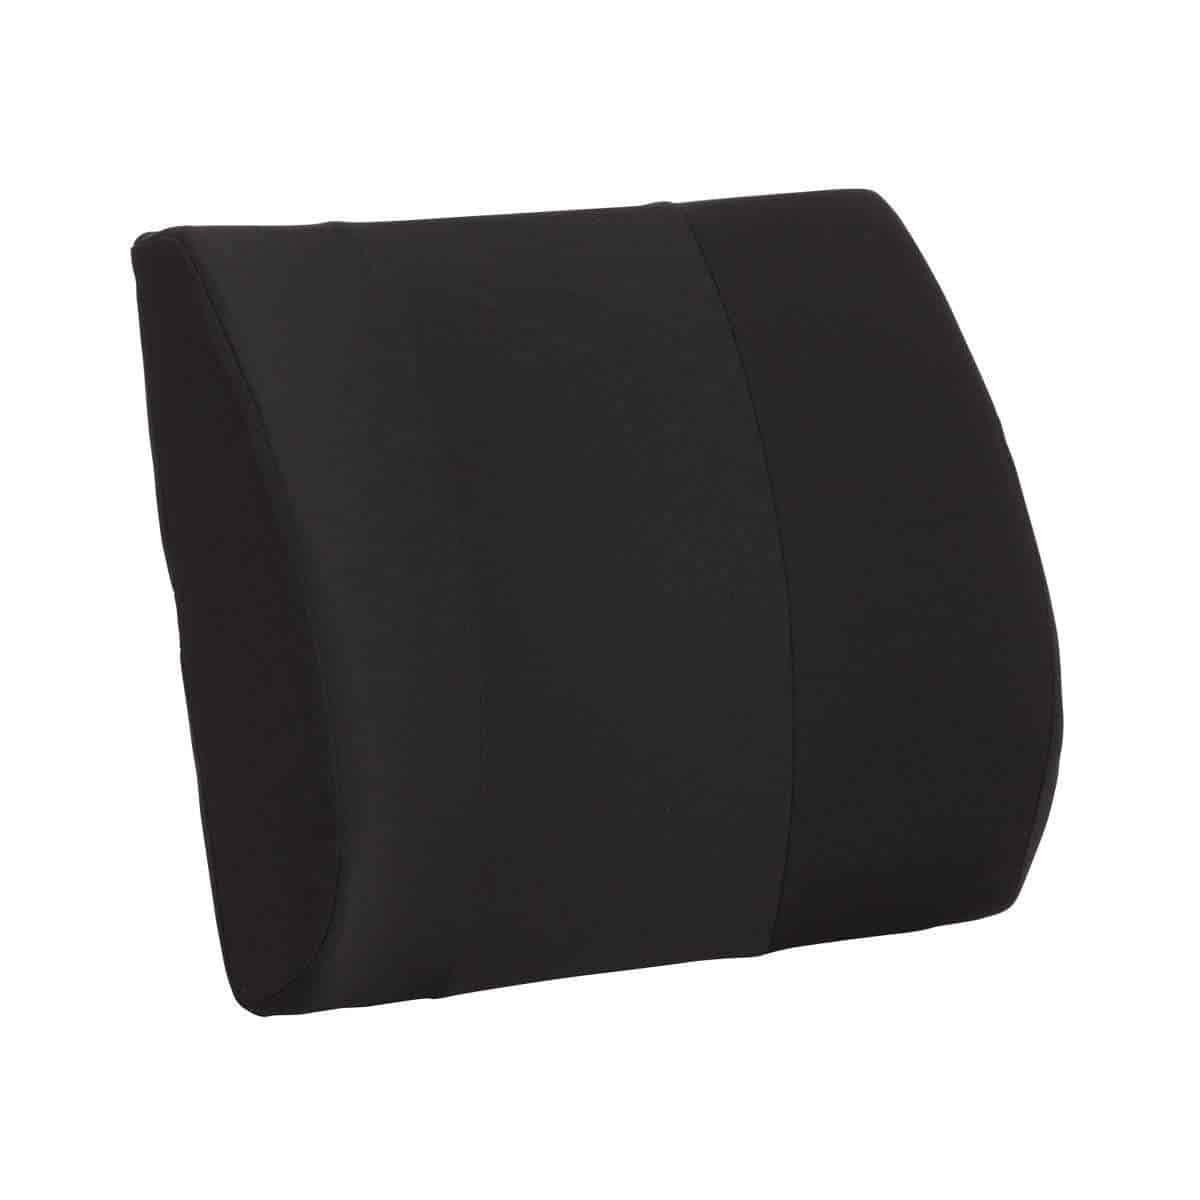  DMI Lumbar Support Pillow for Chair to Assist with